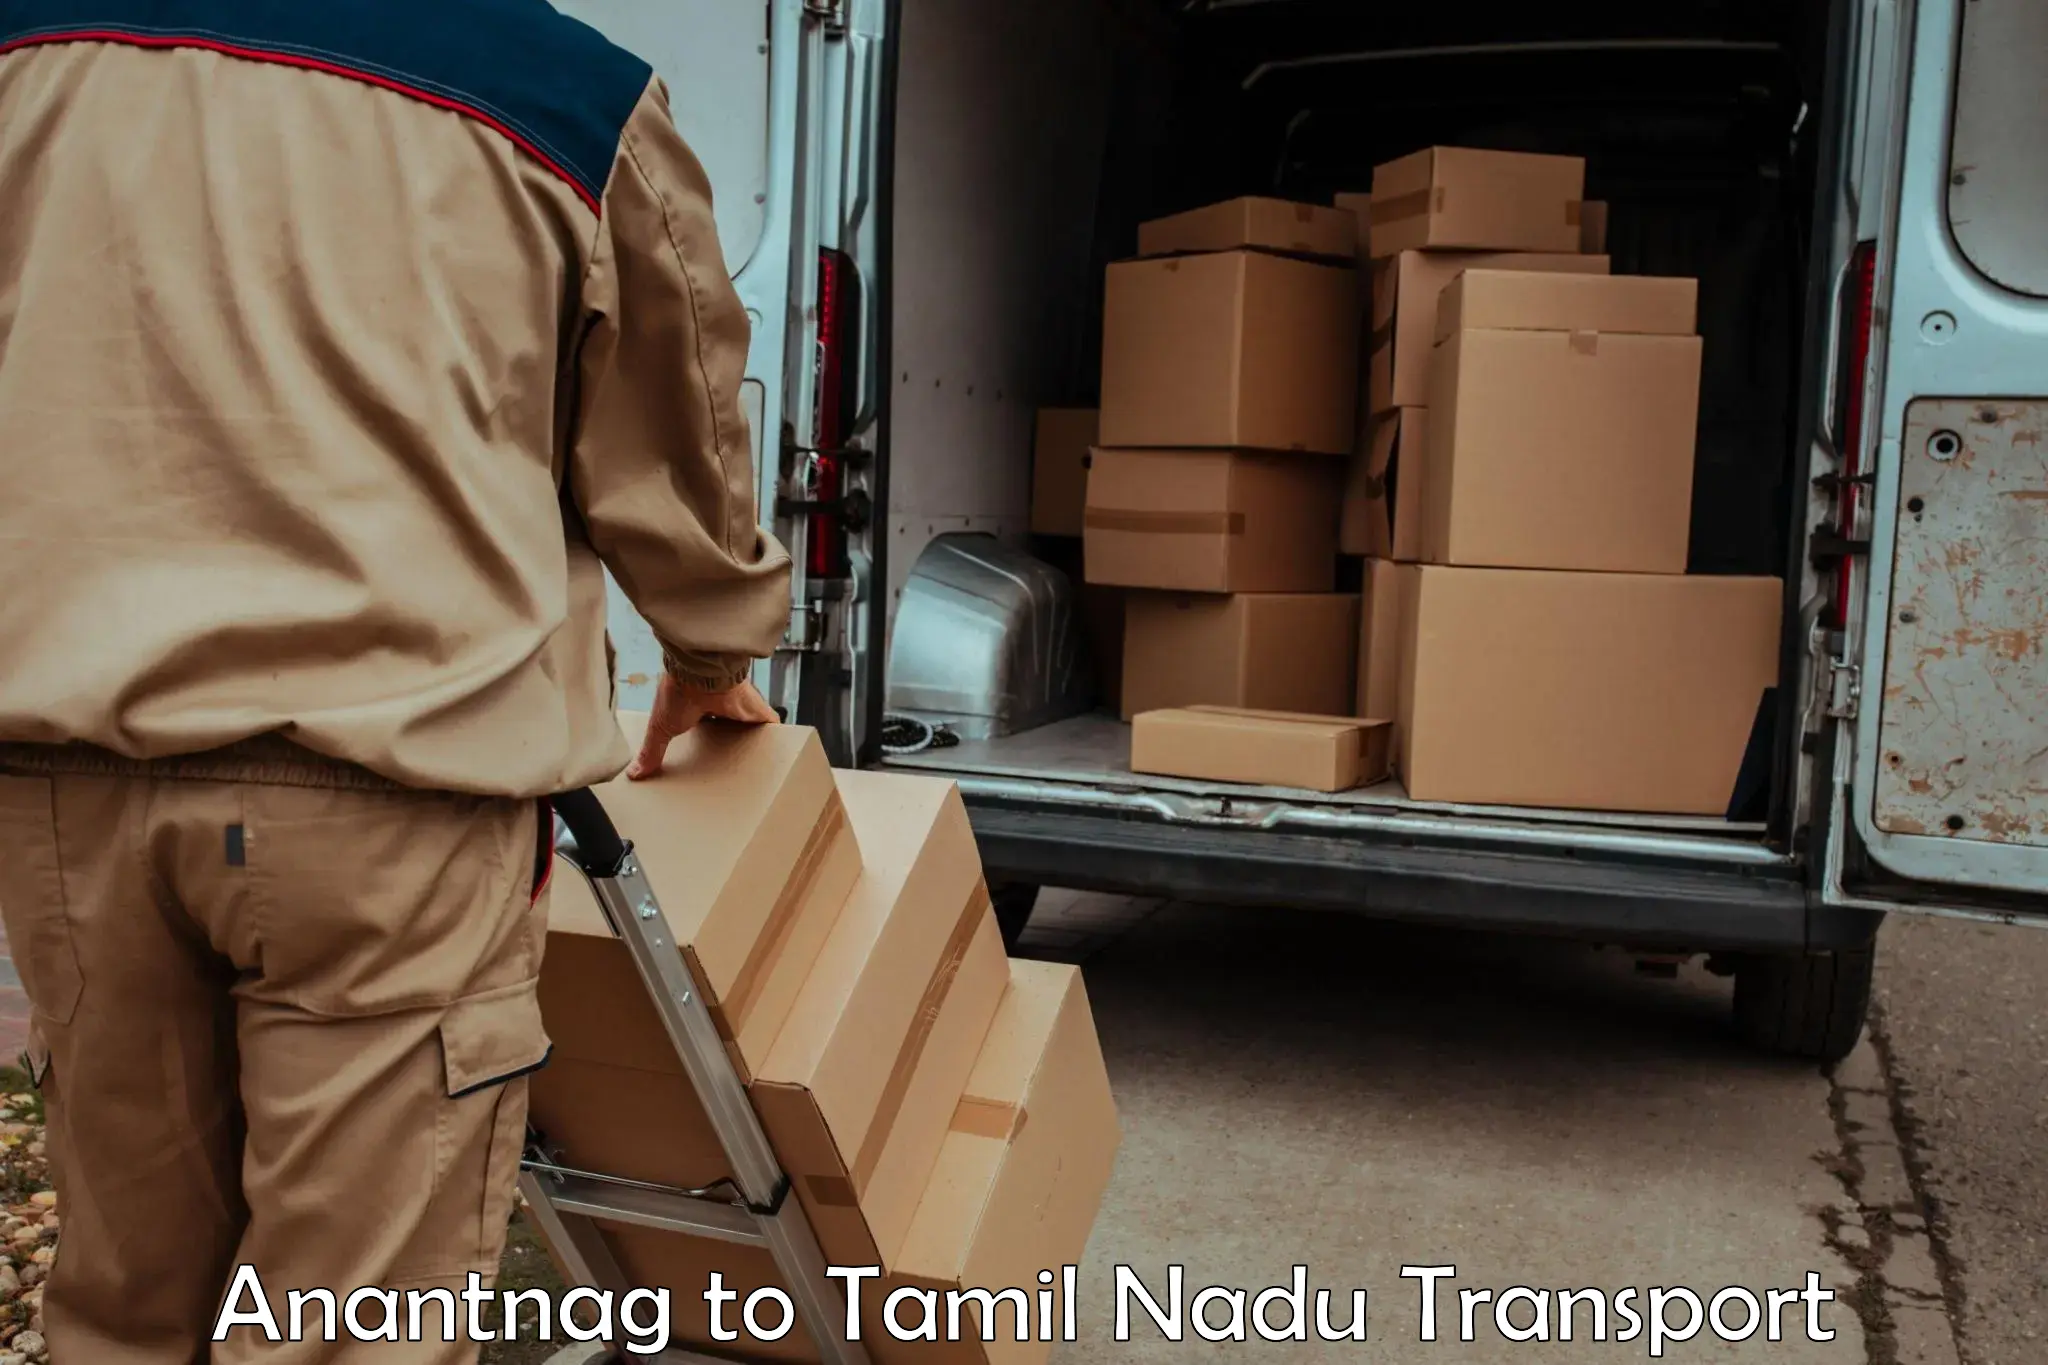 Daily parcel service transport in Anantnag to Shanmugha Arts Science Technology and Research Academy Thanjavur